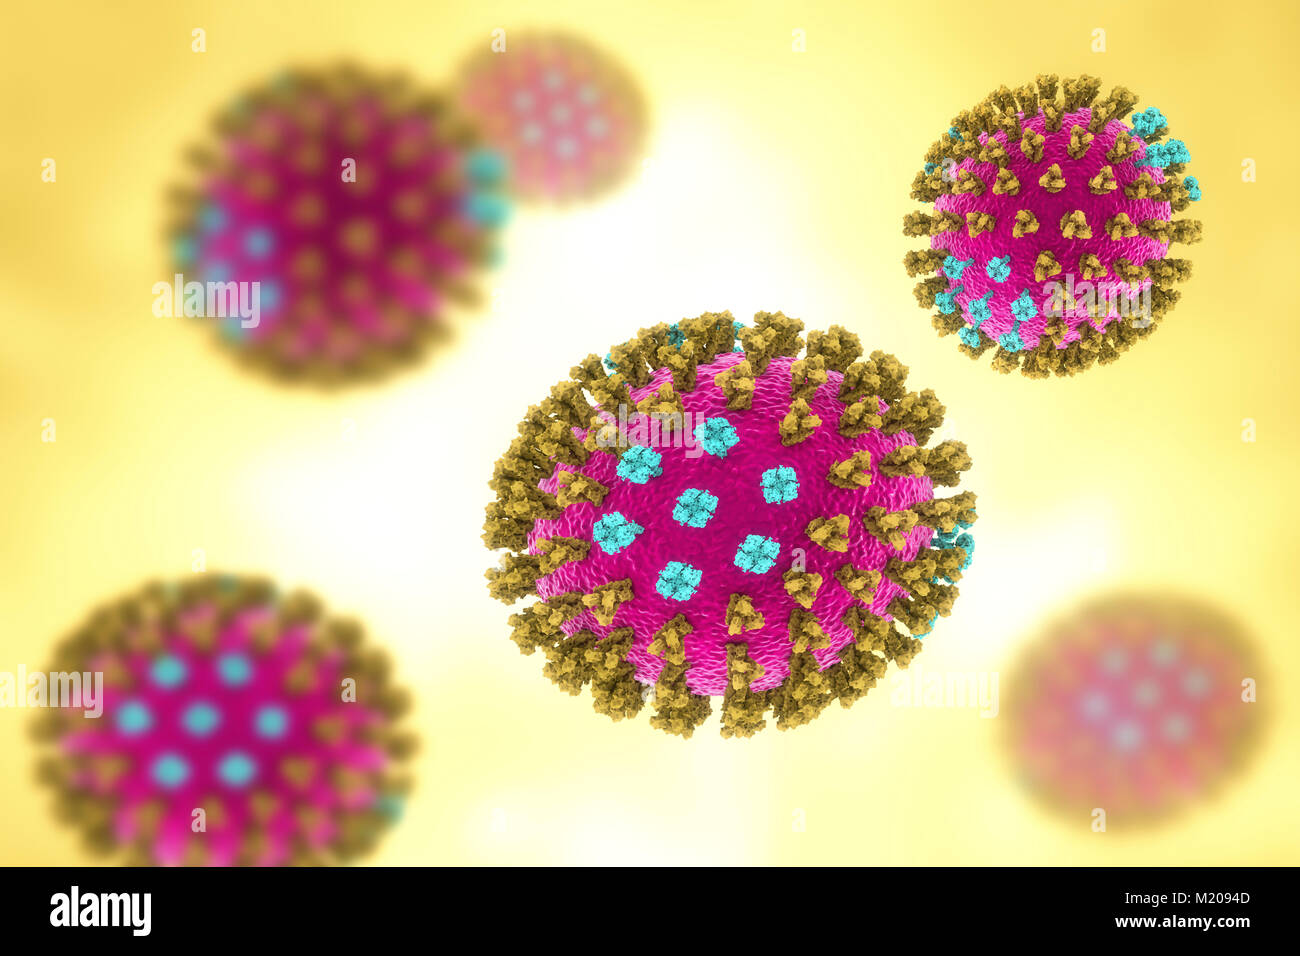 Flu viruses, Michigan strain, computer illustration. Each virus consists of a core of RNA (ribonucleic acid) genetic material surrounded by a protein coat (purple). Embedded in the coat are surface proteins (spikes). There are two types of surface protein, hemagglutinin (green) and neuraminidase (blue), and each exists in several subtypes. Both surface proteins are associated with the pathogenicity of a virus. Hemagglutinin binds to host cells, allowing the virus to enter them and replicate. Neuraminidase allows the new particles to exit the host after replication. Stock Photo